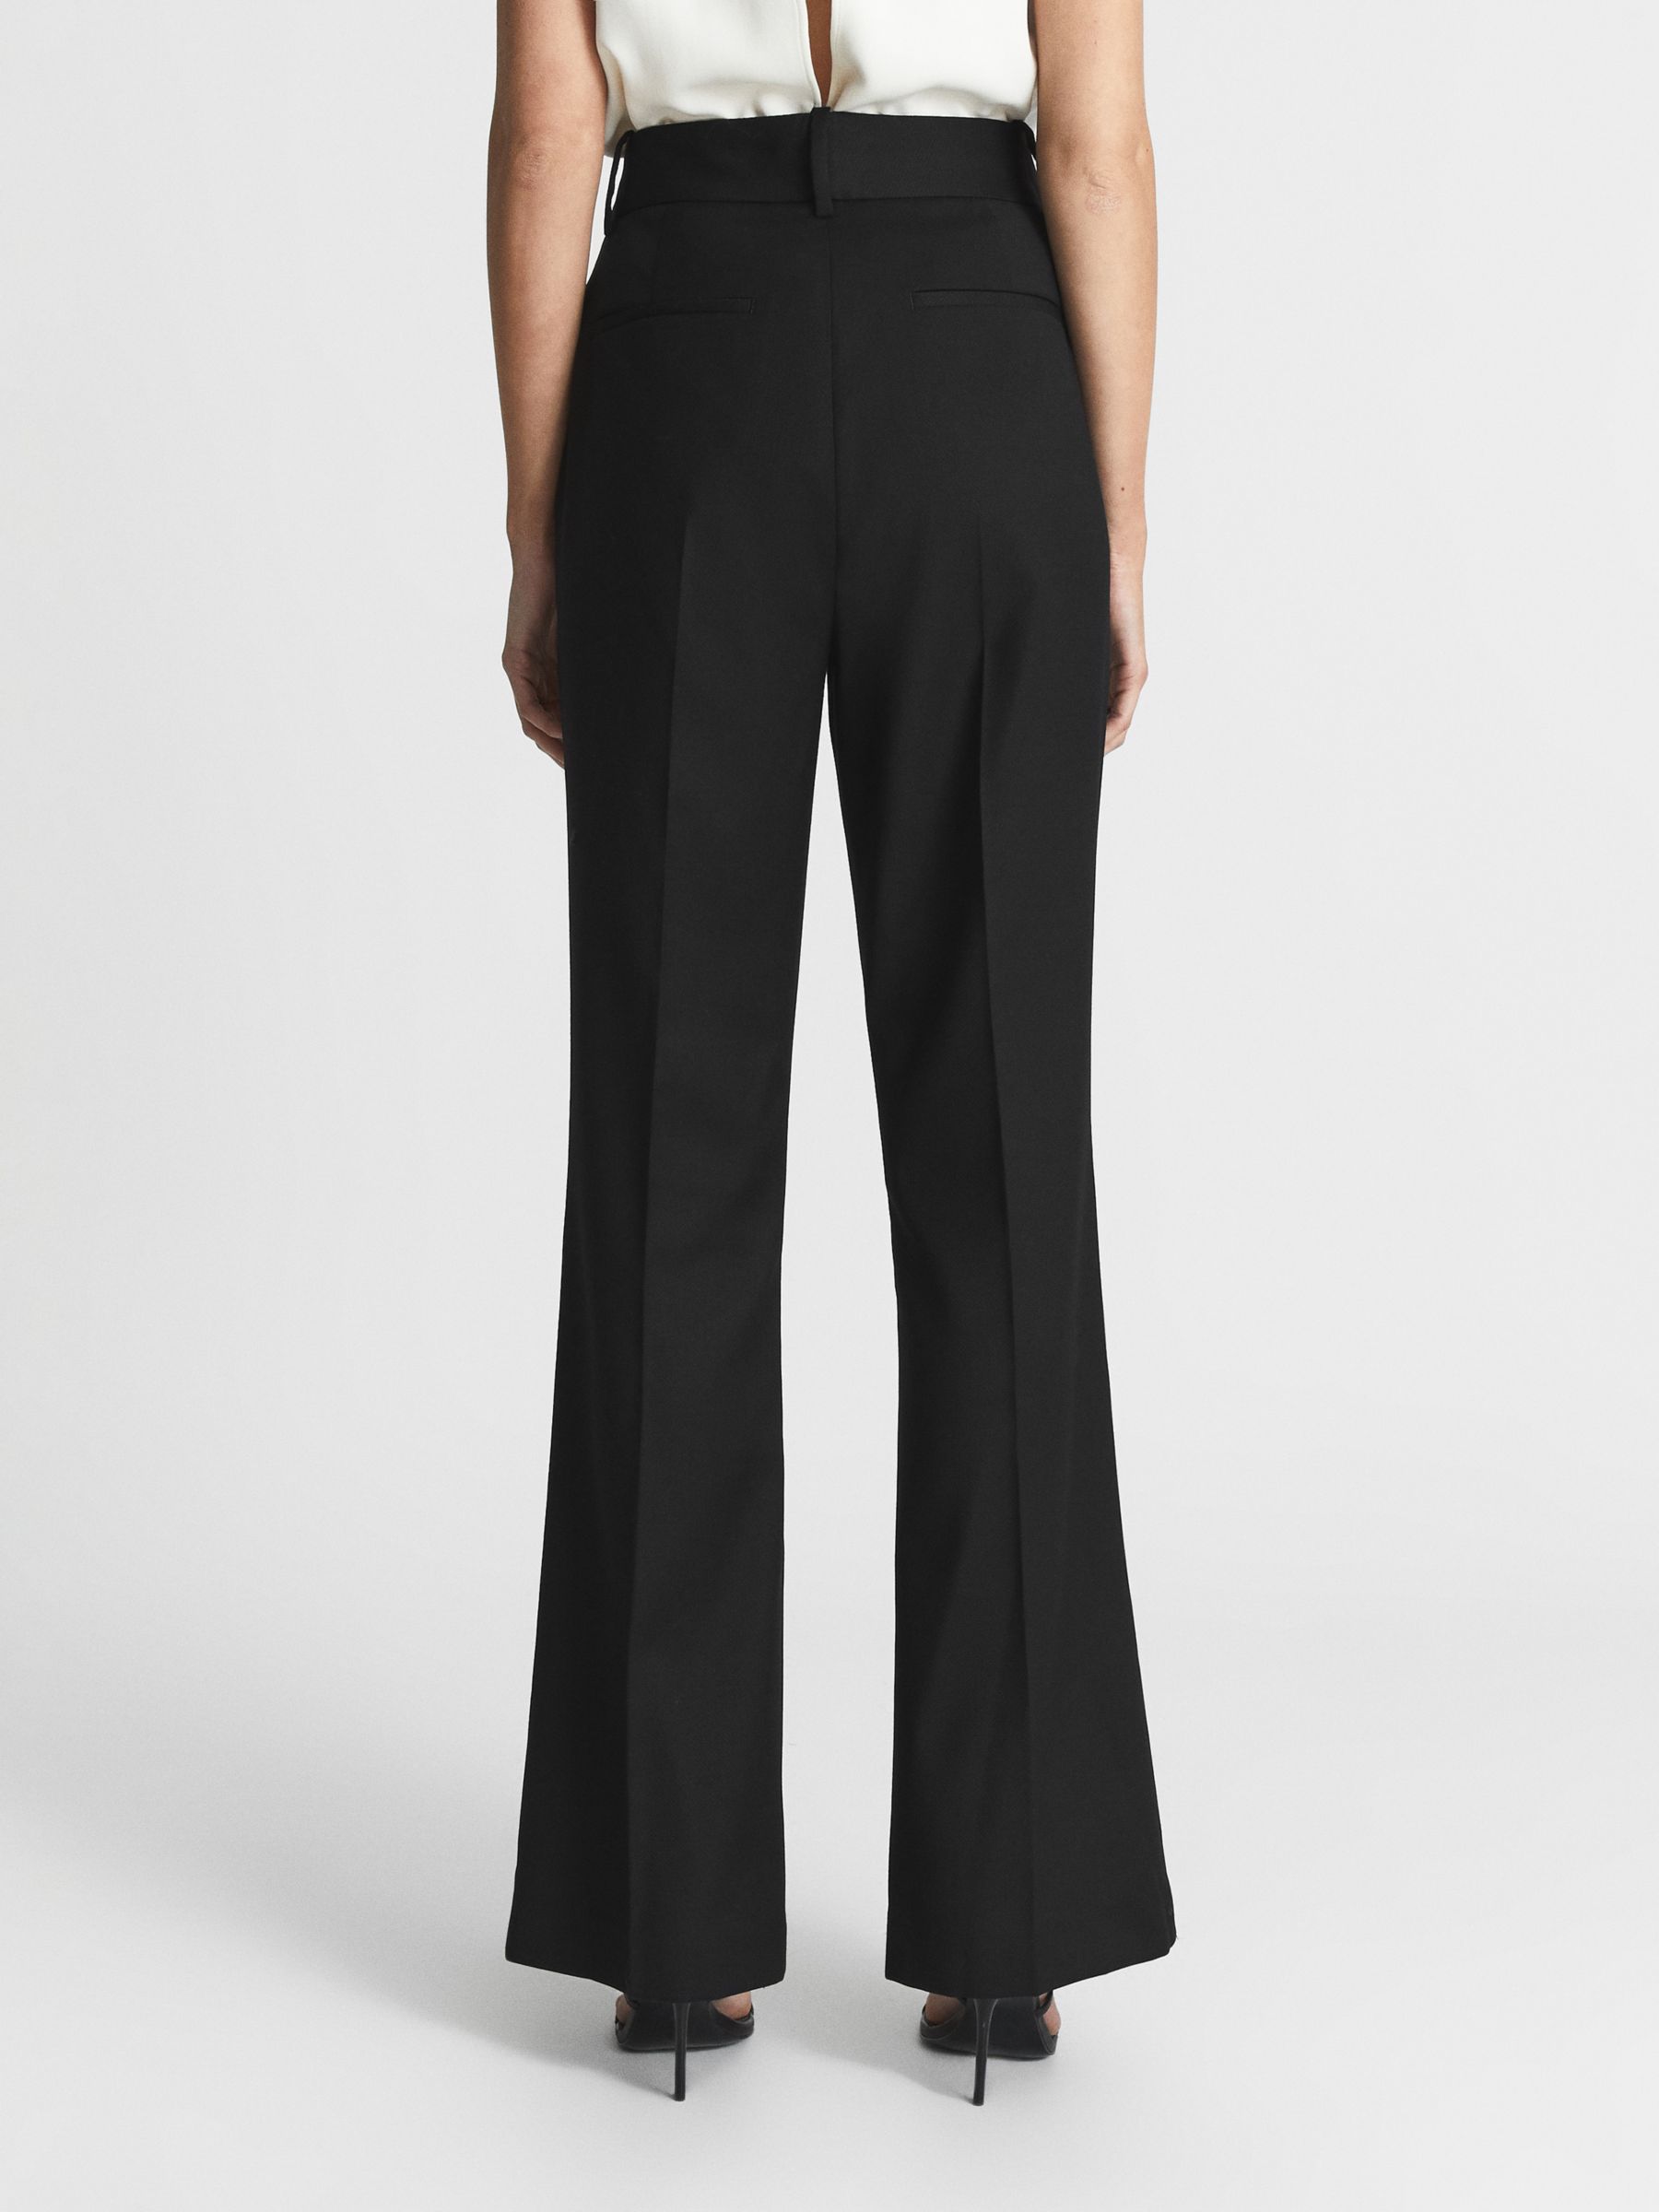 Reiss Haisley Tailored Flare Trousers, Black at John Lewis & Partners